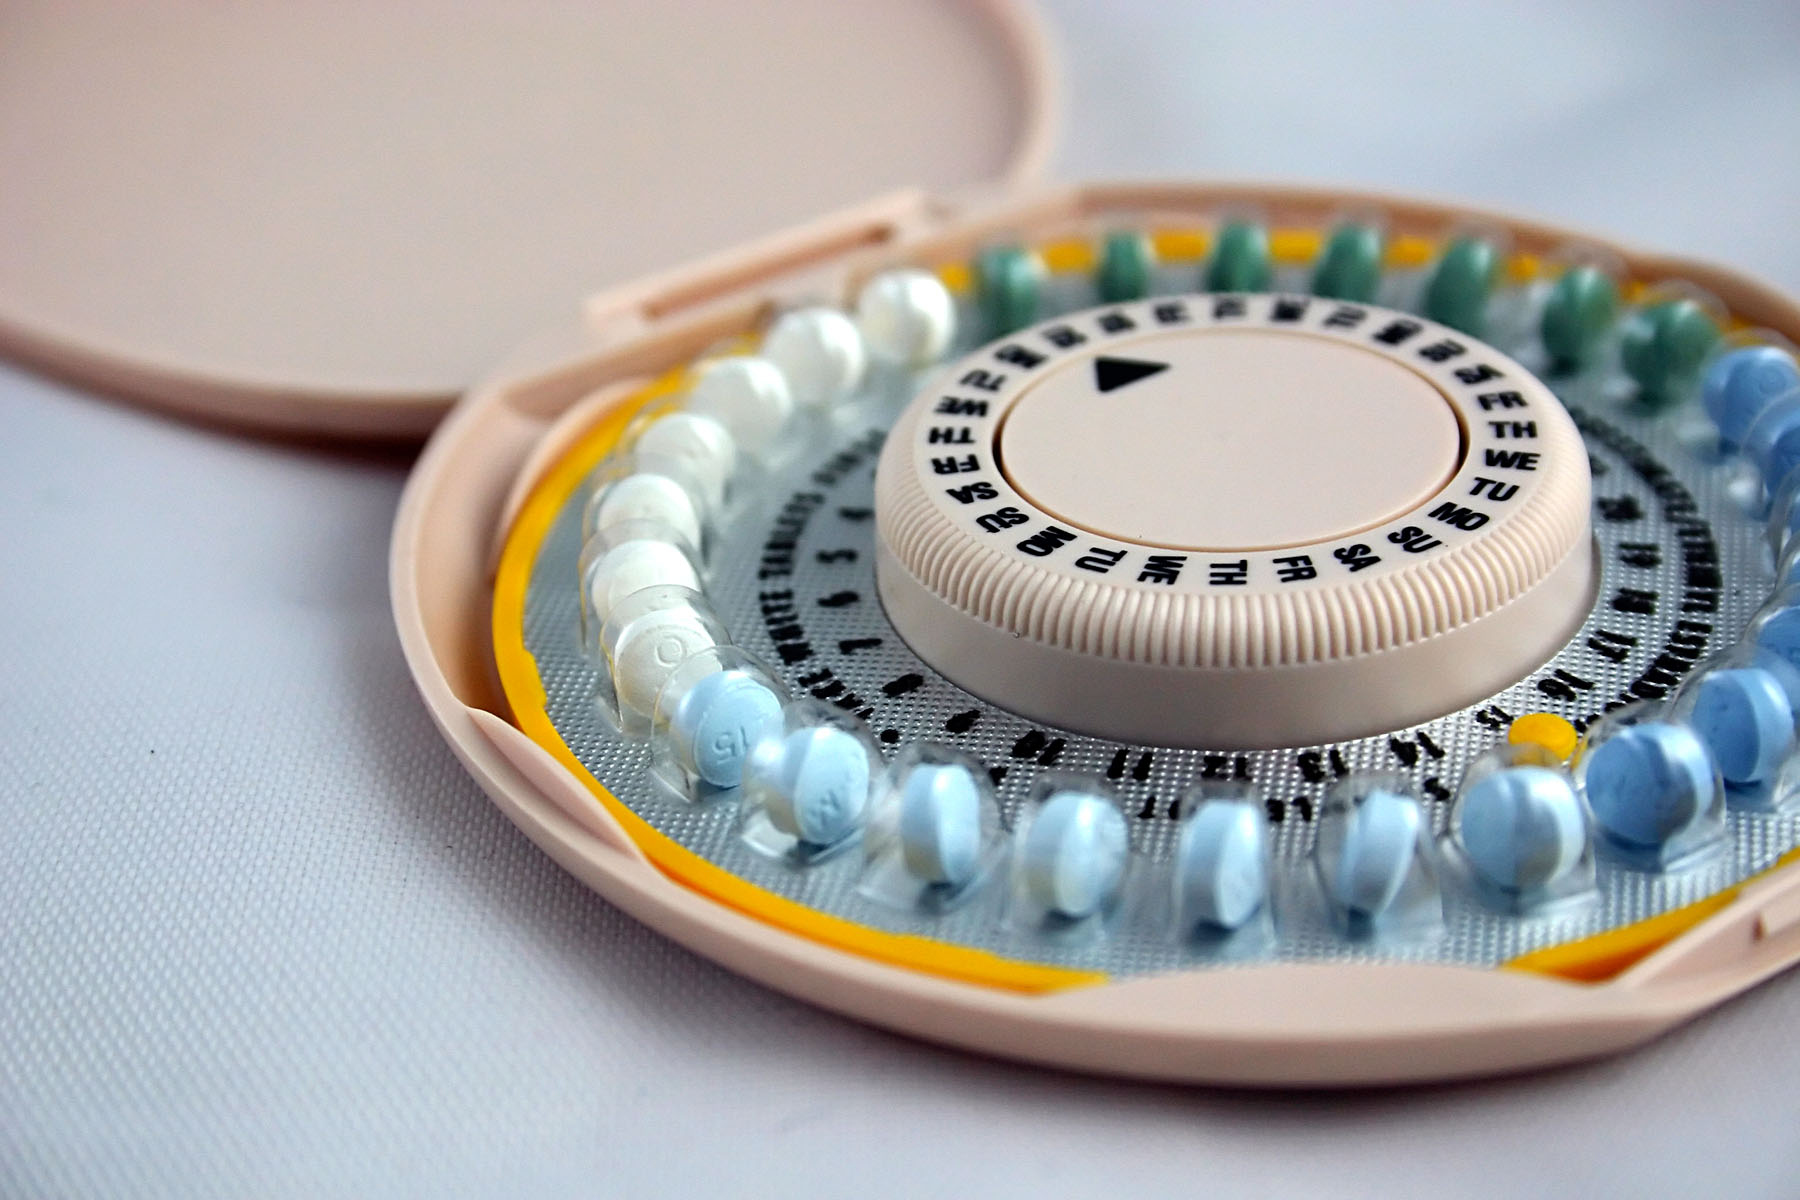 A close up of a packet of birth control pills